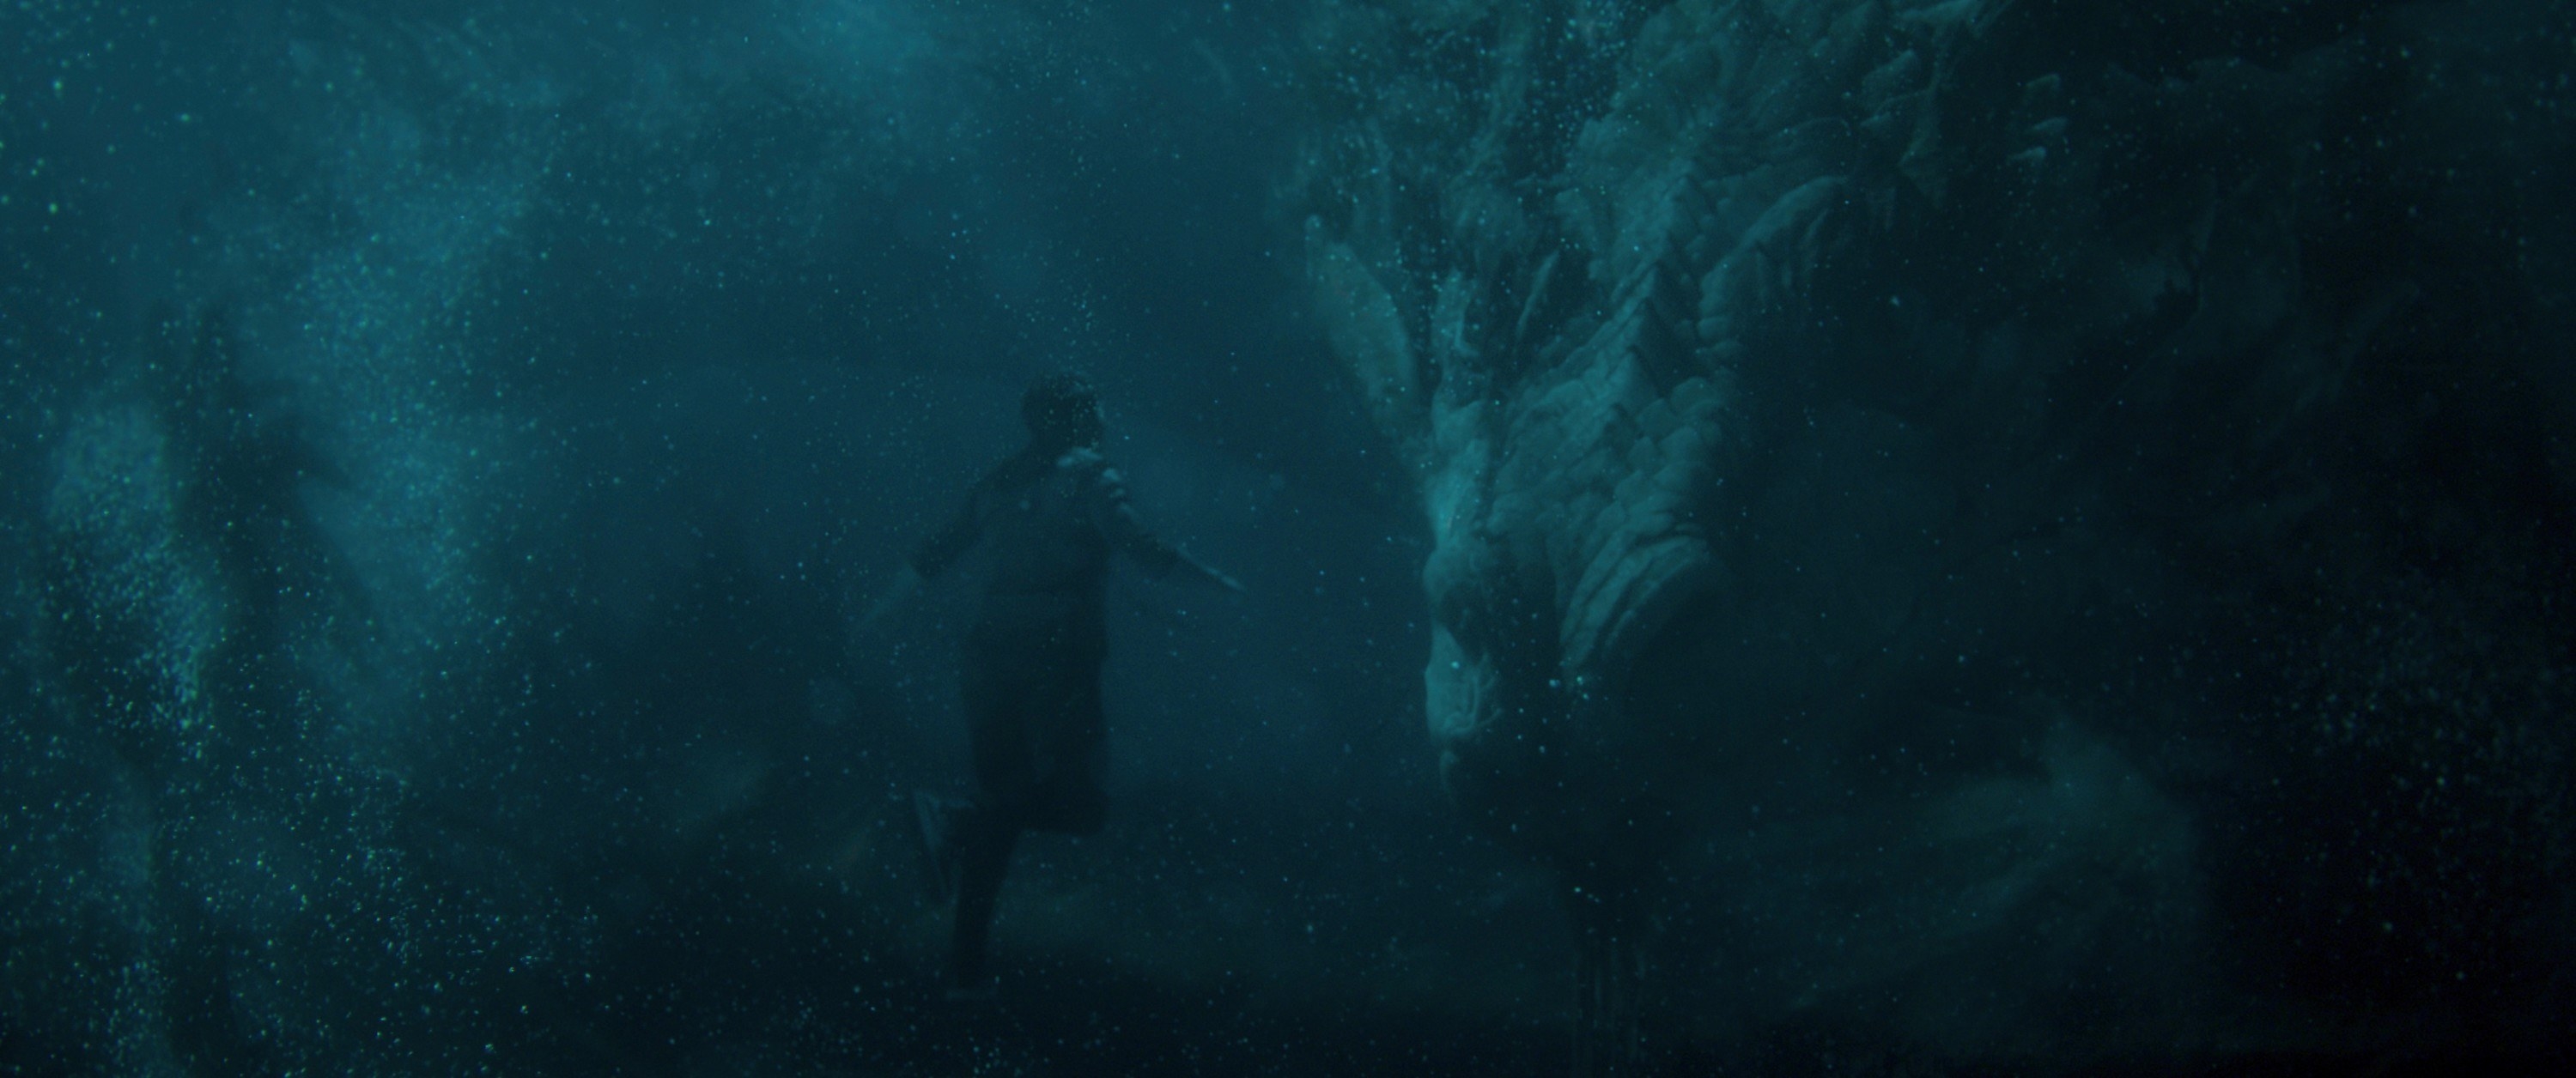 A man swims with a dragon underwater